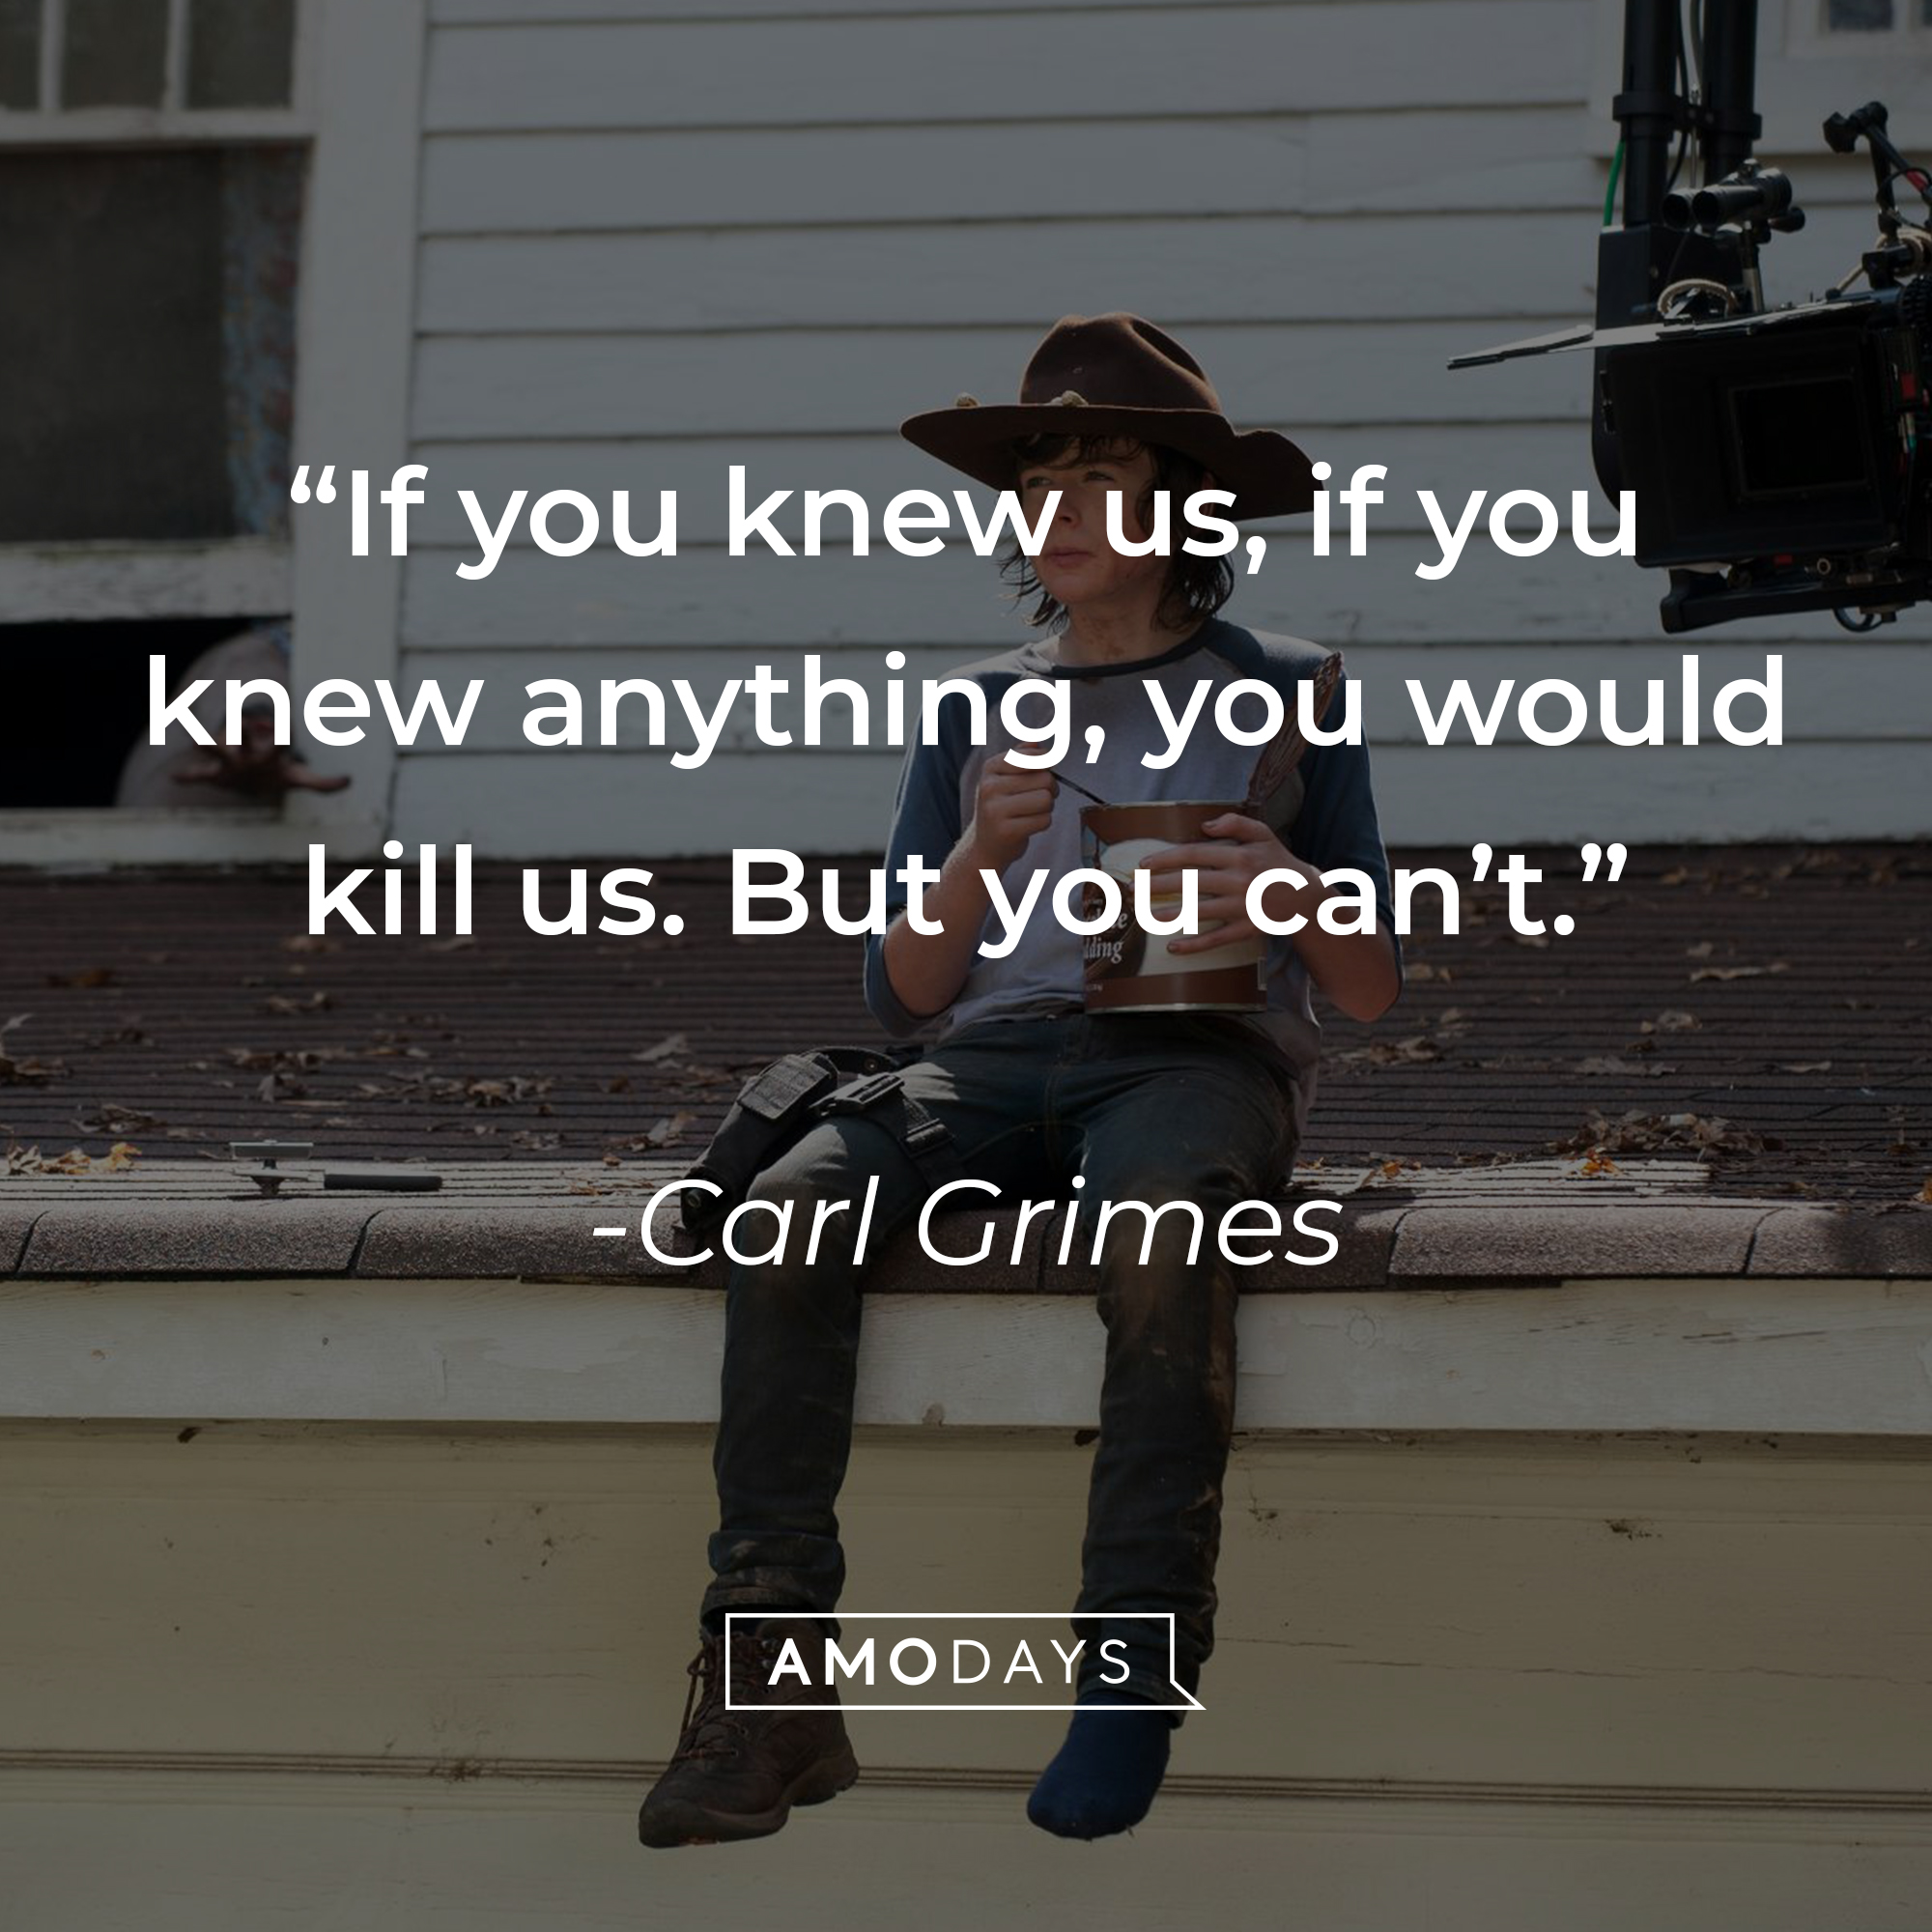 Carl Grimes,  with his quote: “If you knew us, if you knew anything, you would kill us. But you can’t.”  | Source: facebook.com/TheWalkingDeadAMC